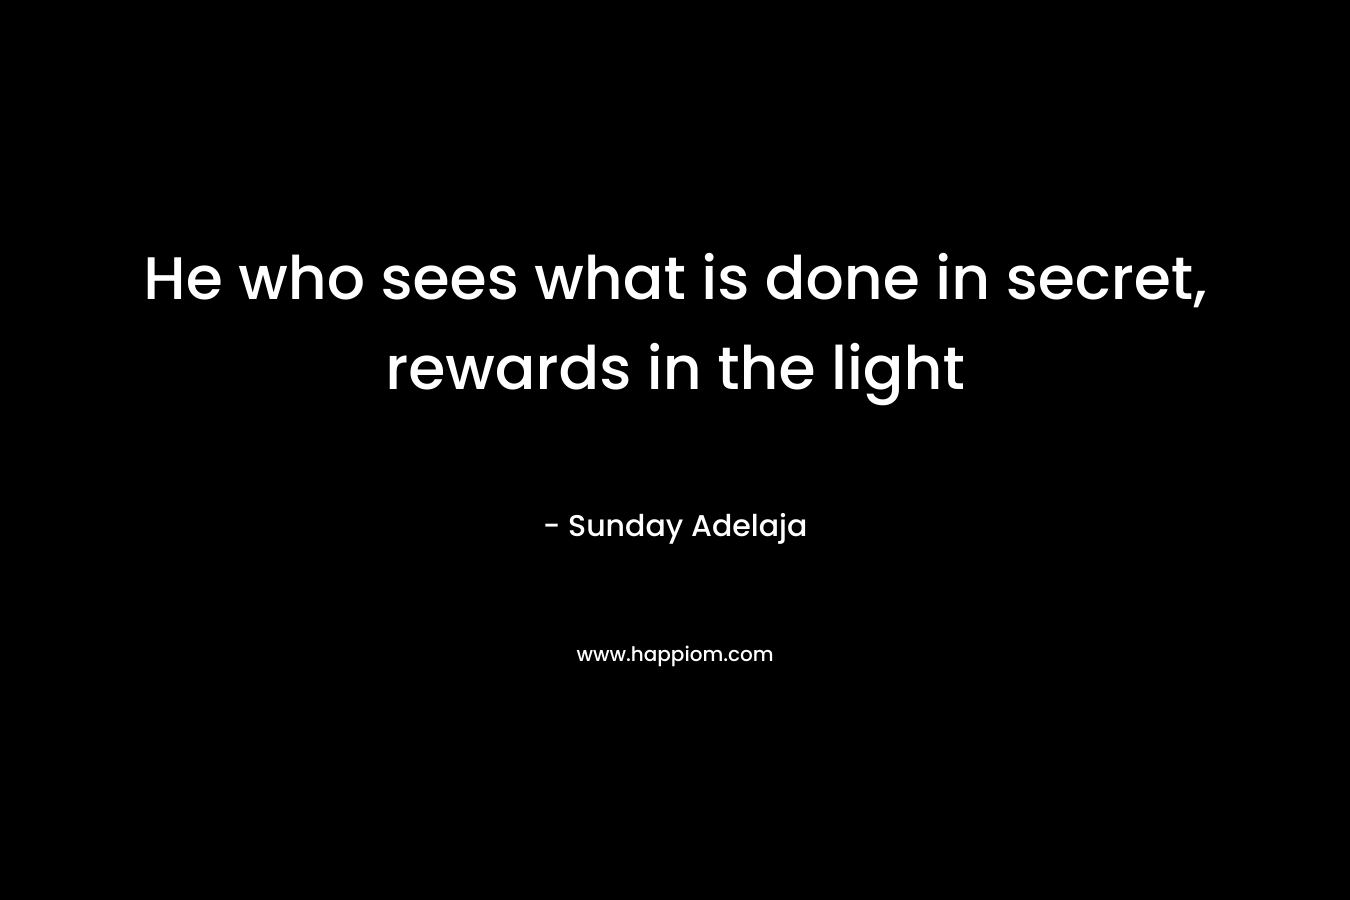 He who sees what is done in secret, rewards in the light